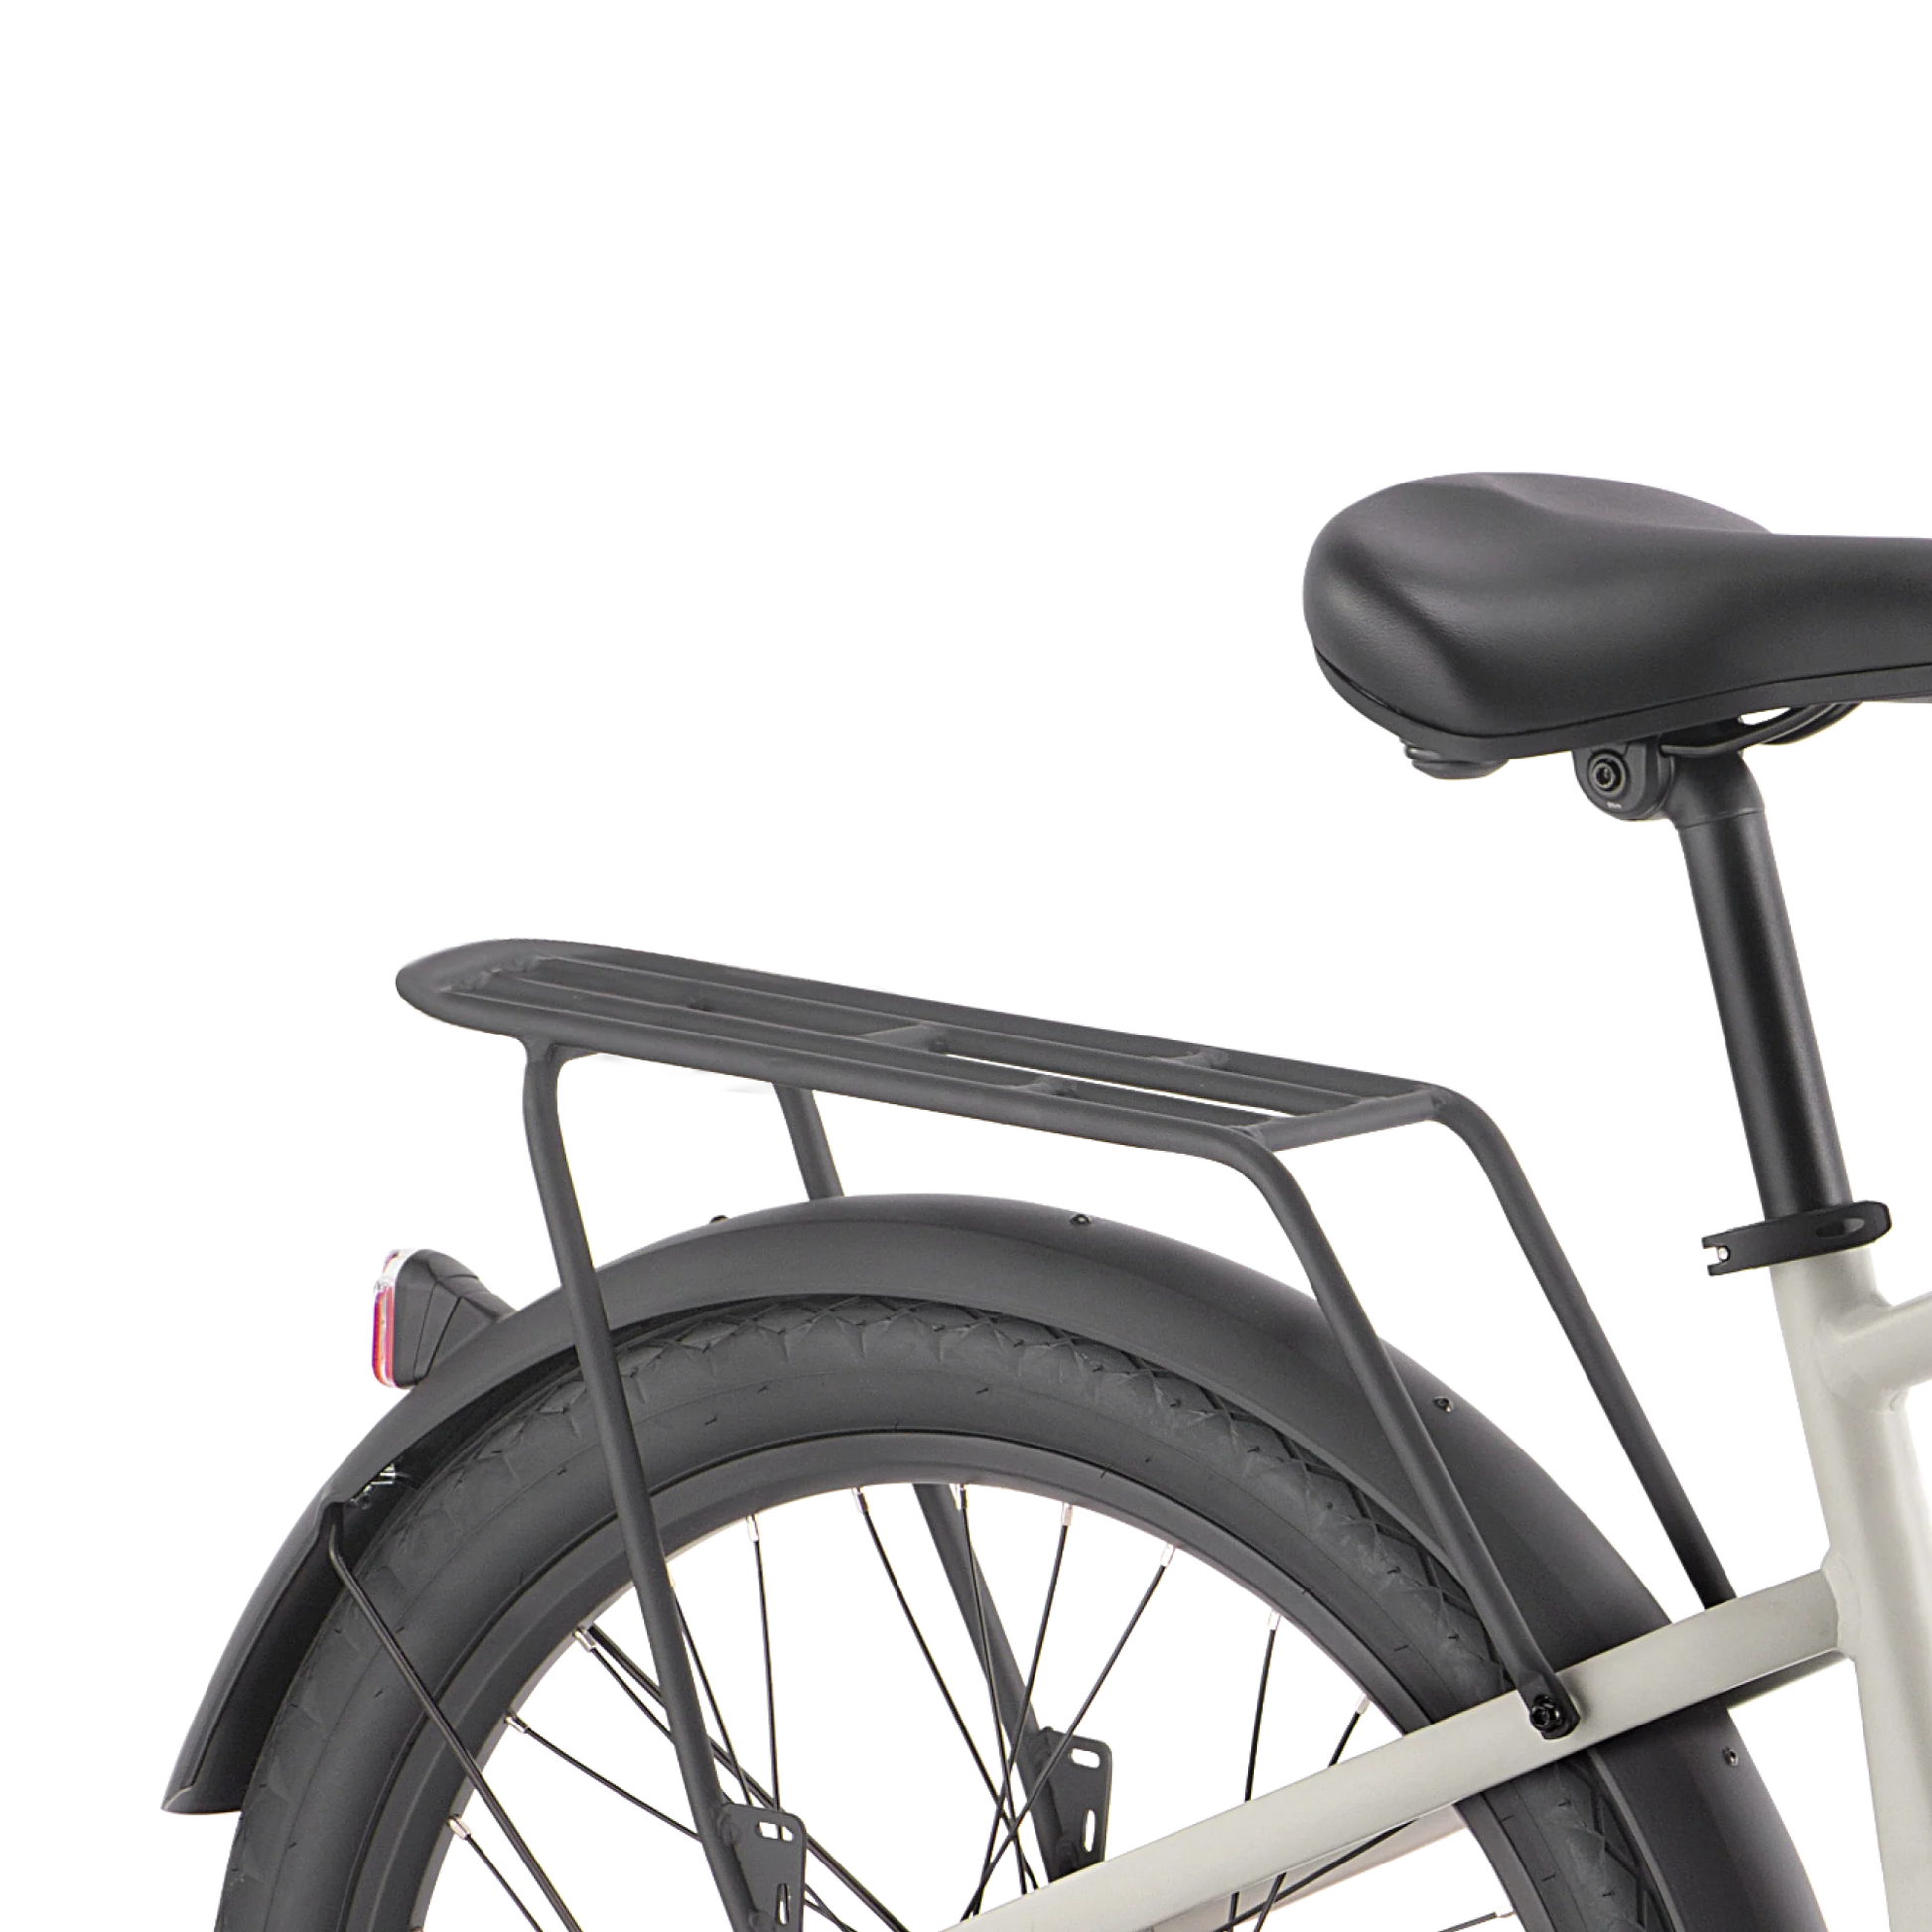 The Velotric Rear Rack - Discover 1 with a basket on it.